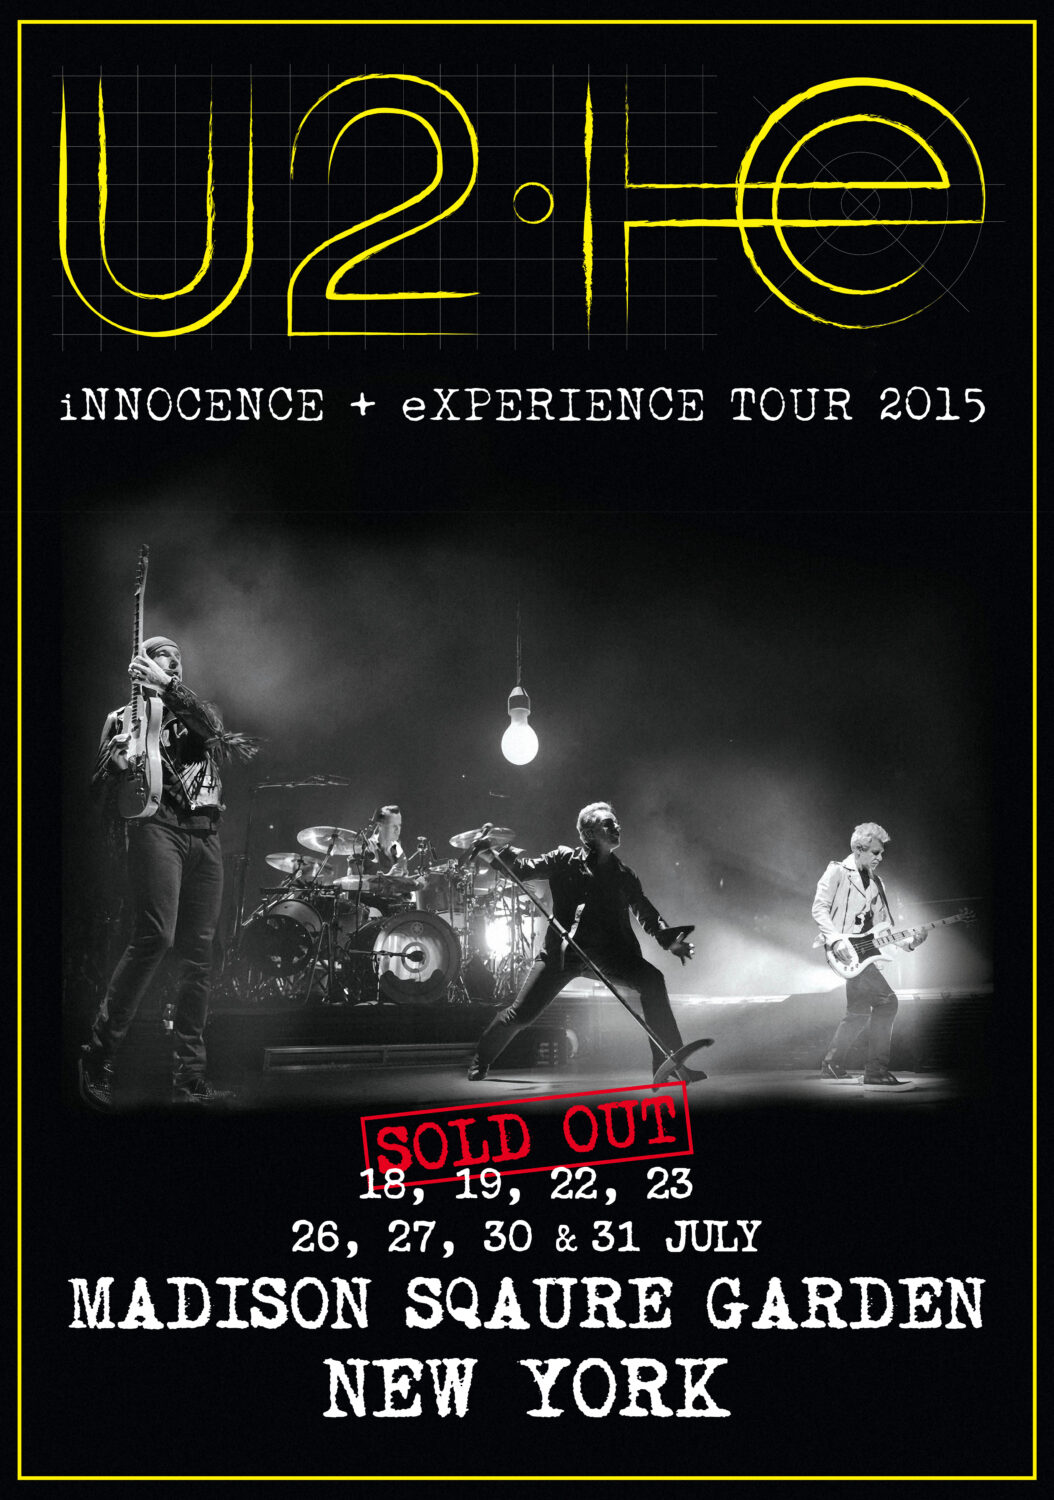 innocence and experience tour 2015